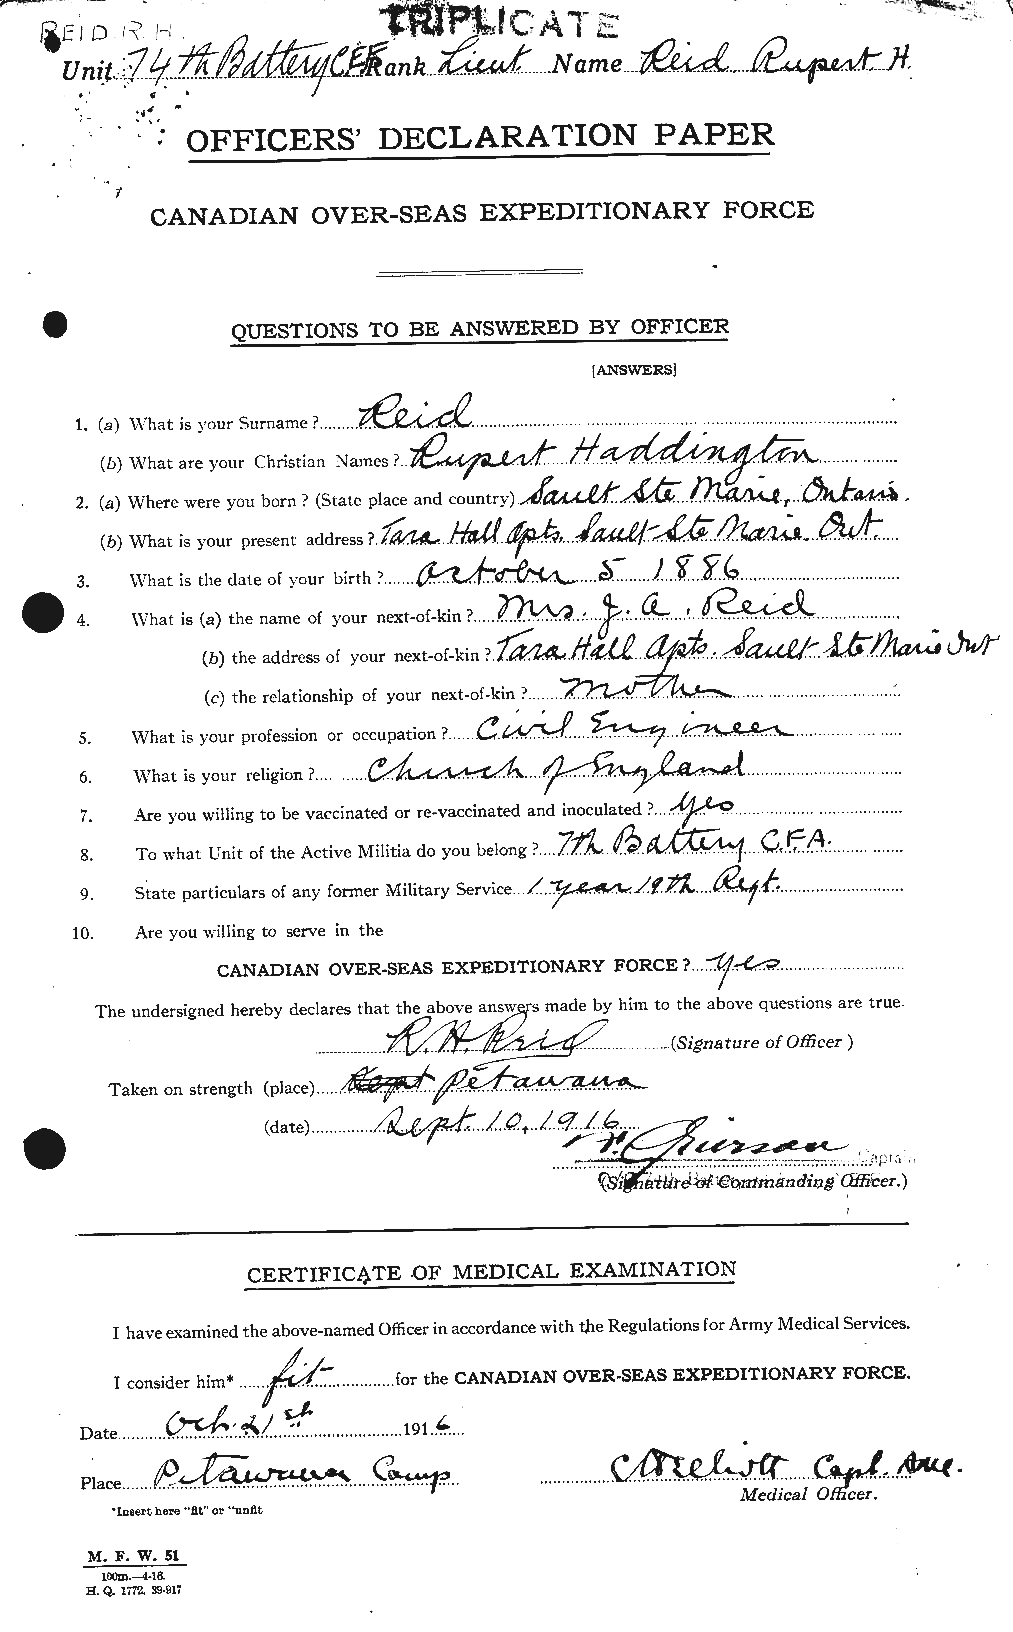 Personnel Records of the First World War - CEF 601941a